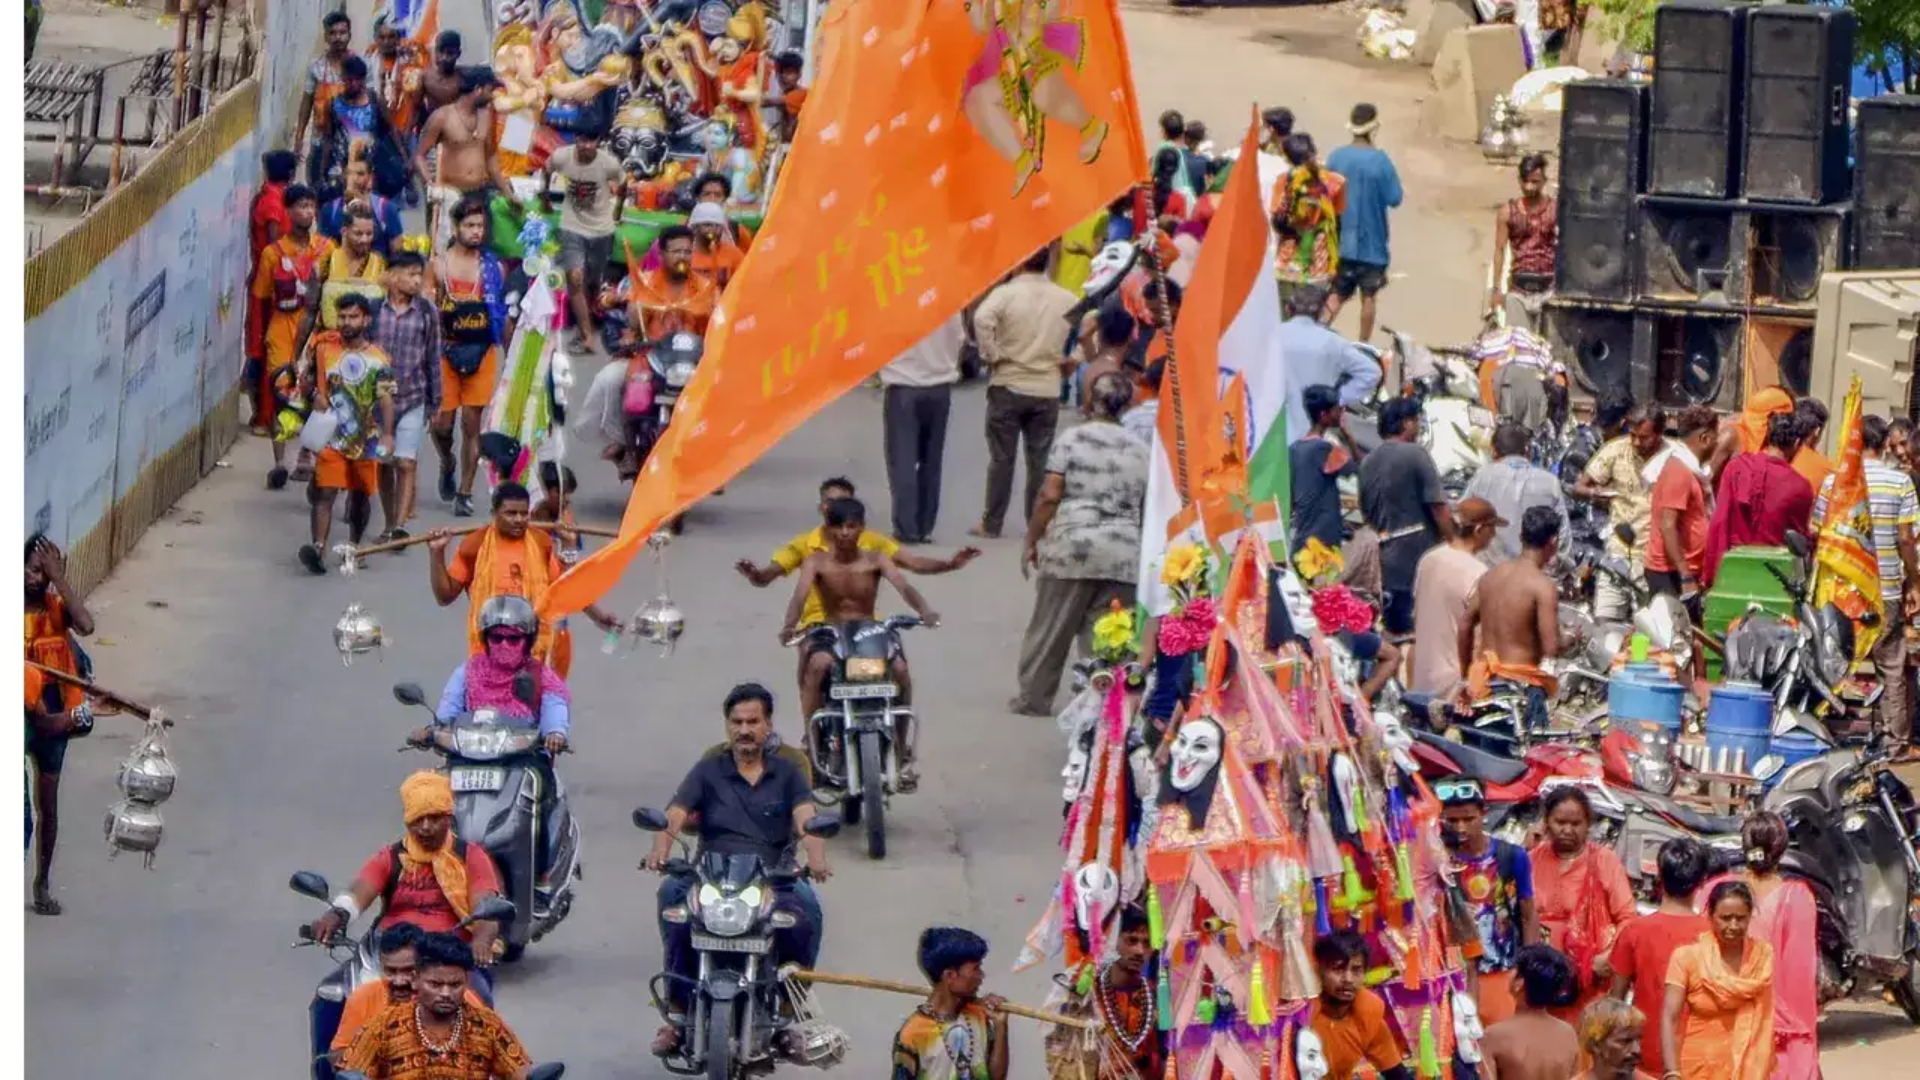 UP Police Modifies Advisory for Eateries on Kanwar Yatra Route Amid Backlash